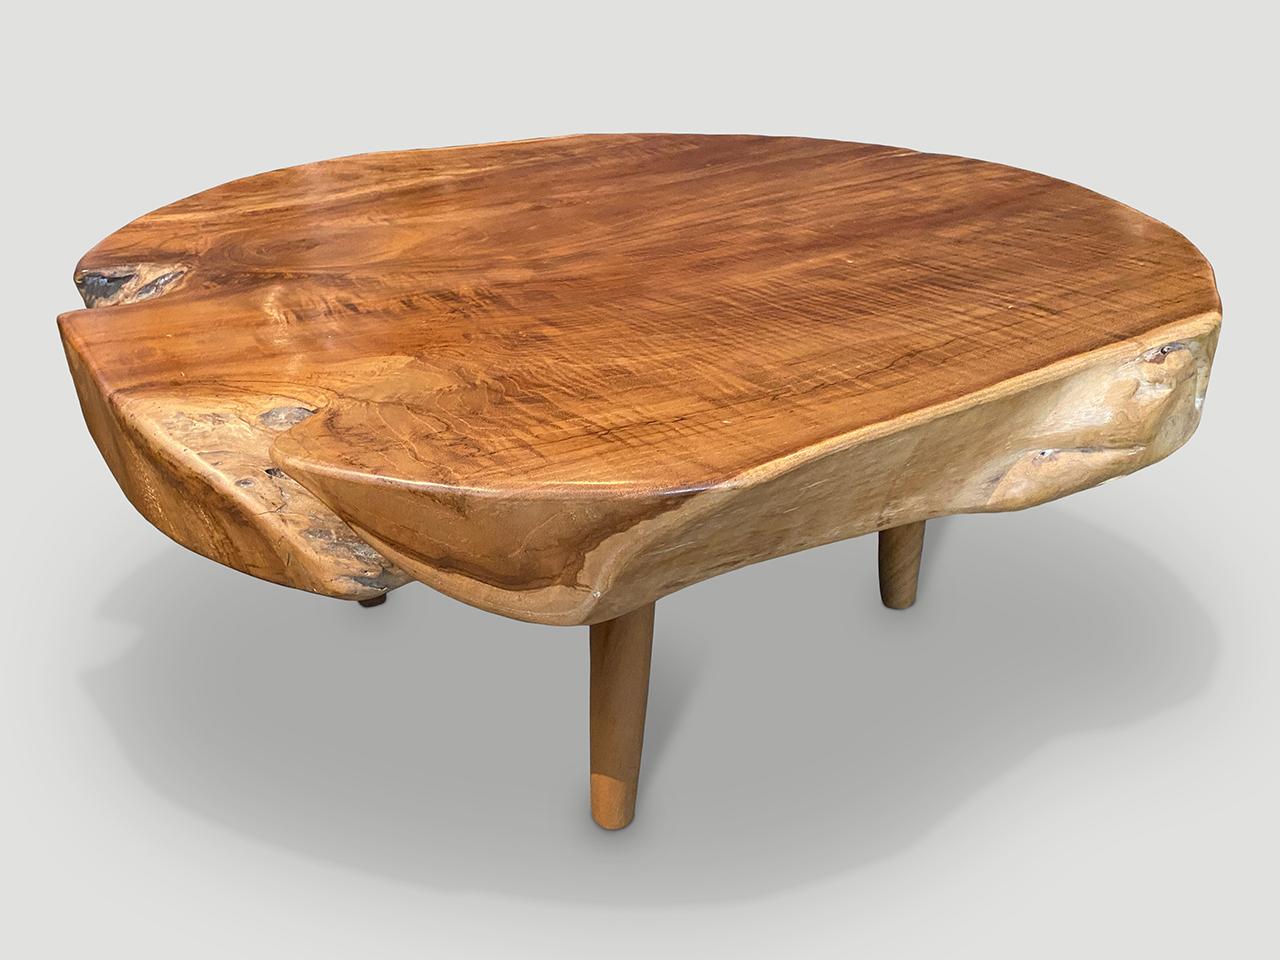 Contemporary Andrianna Shamaris Mid-Century Style Organic Coffee Table For Sale